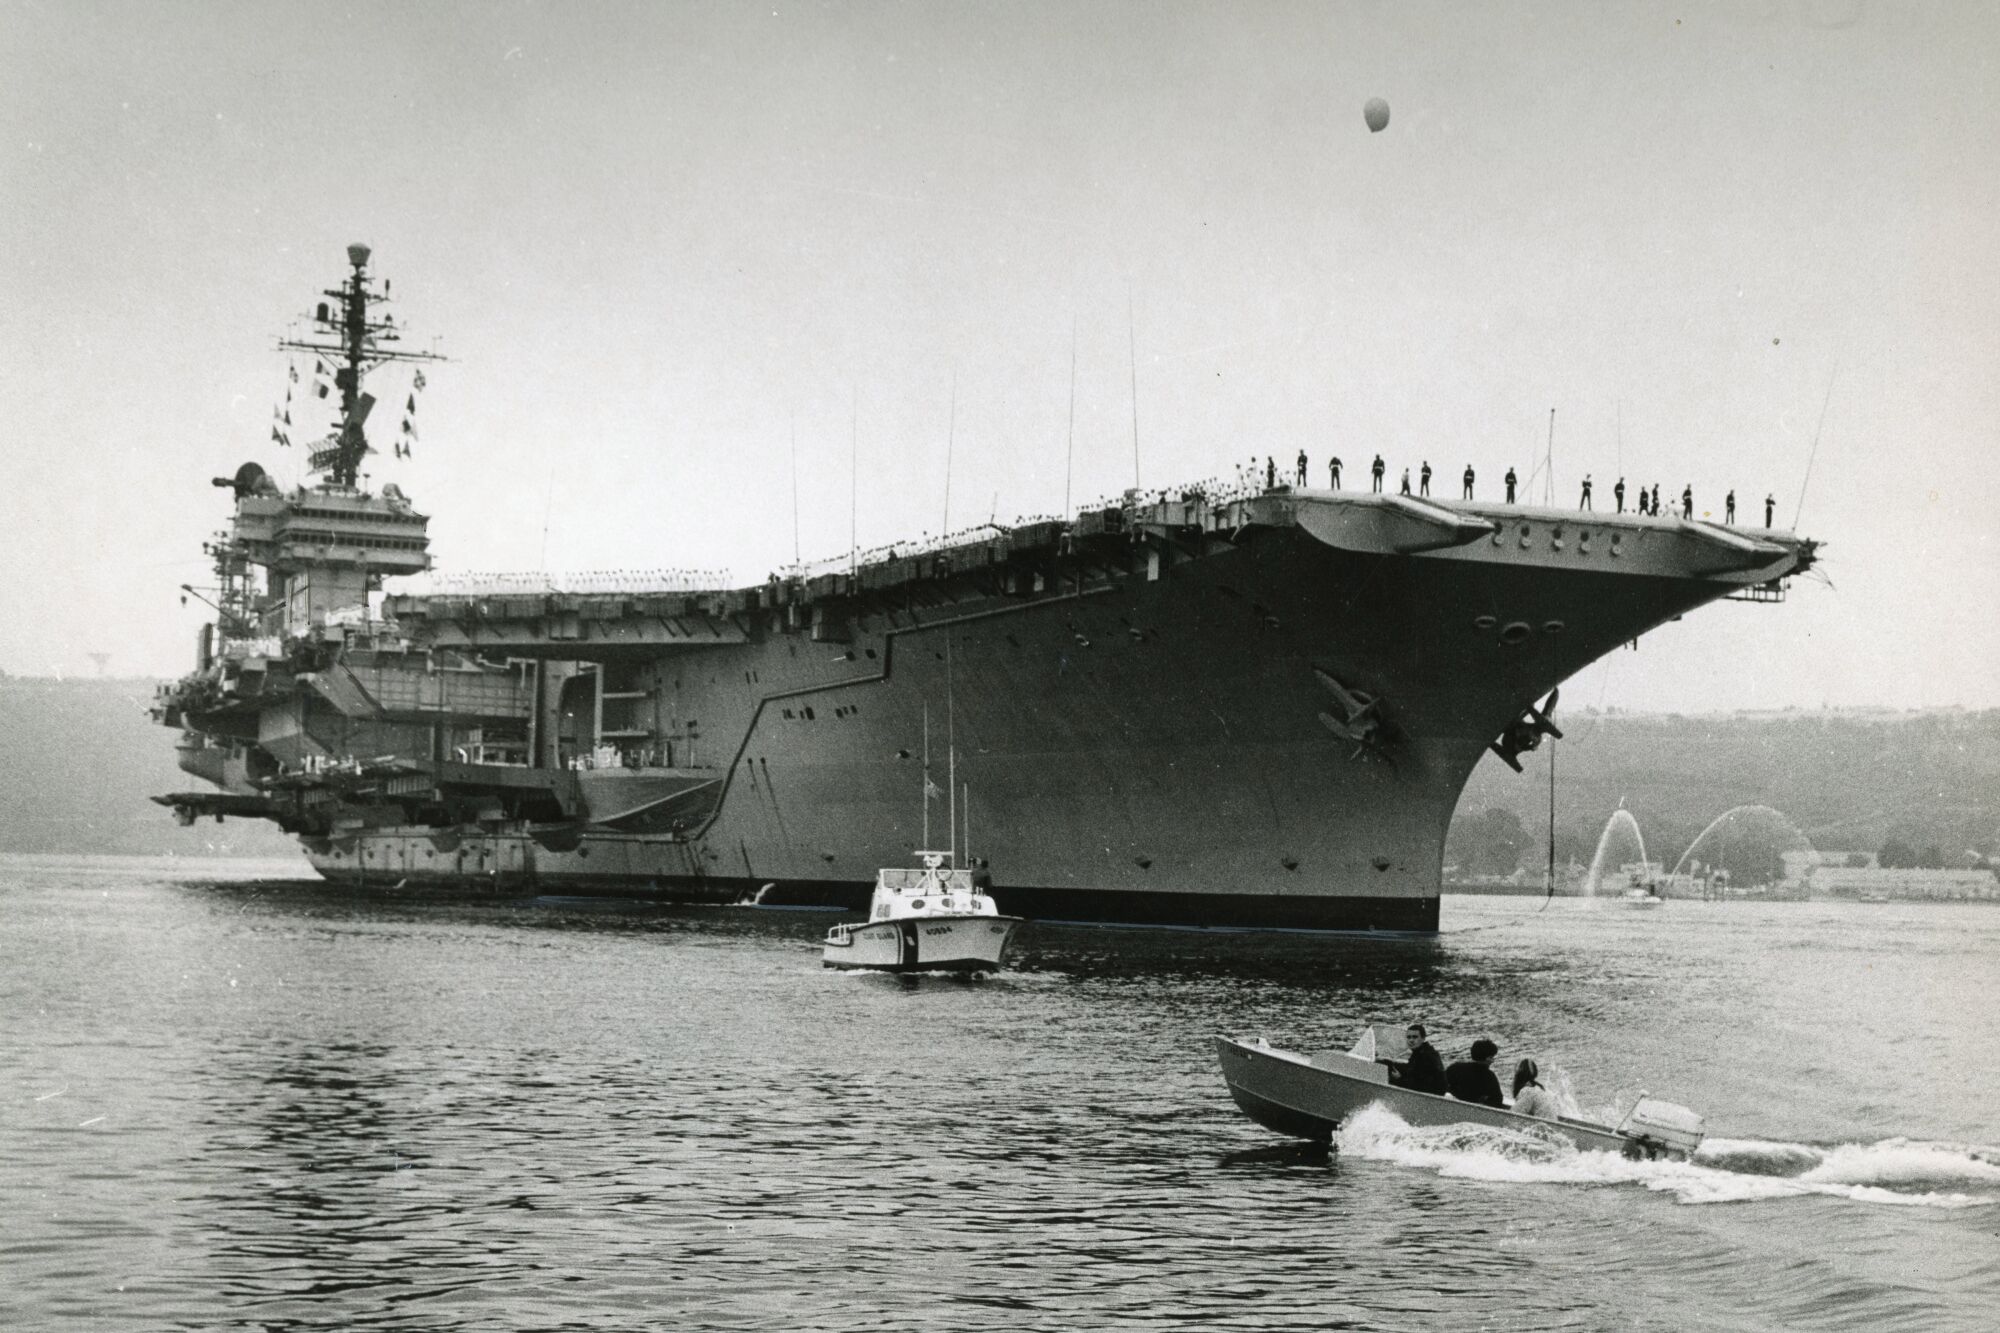 The aircraft carrier Kitty Hawk eases past Point Loma as a motorboat passes beneath its bow in 1968.